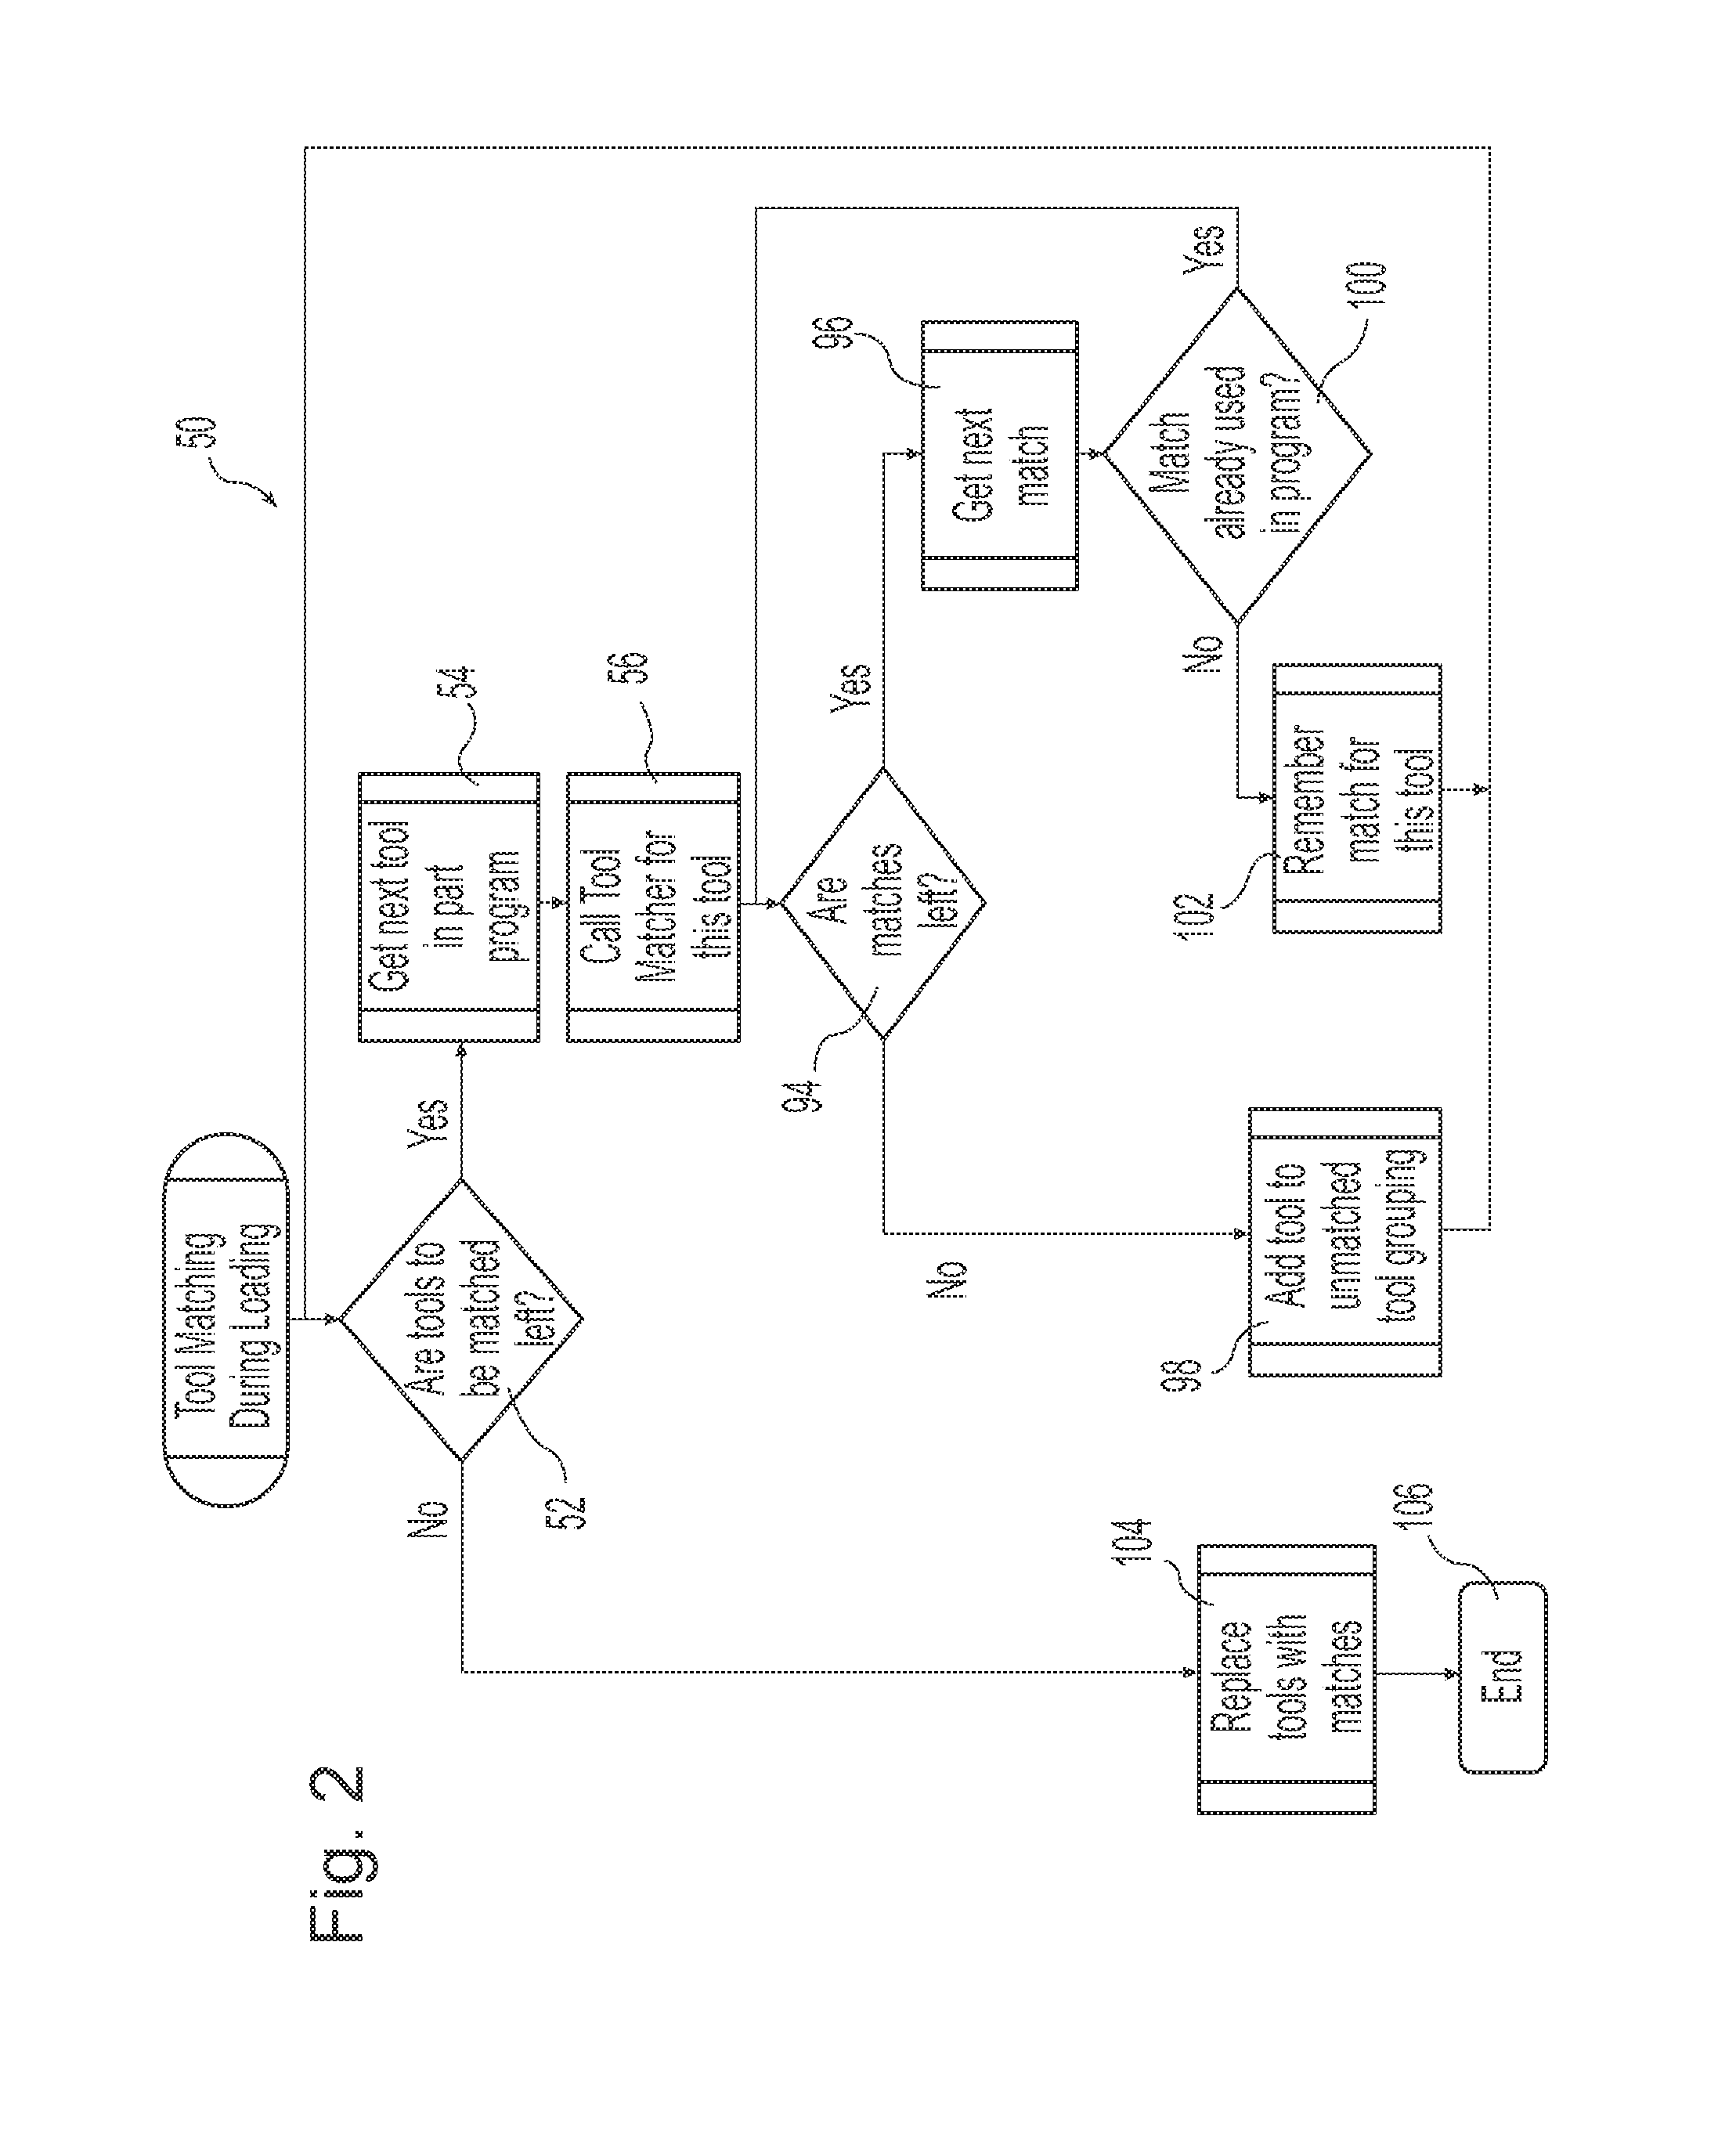 System and method for tool use management